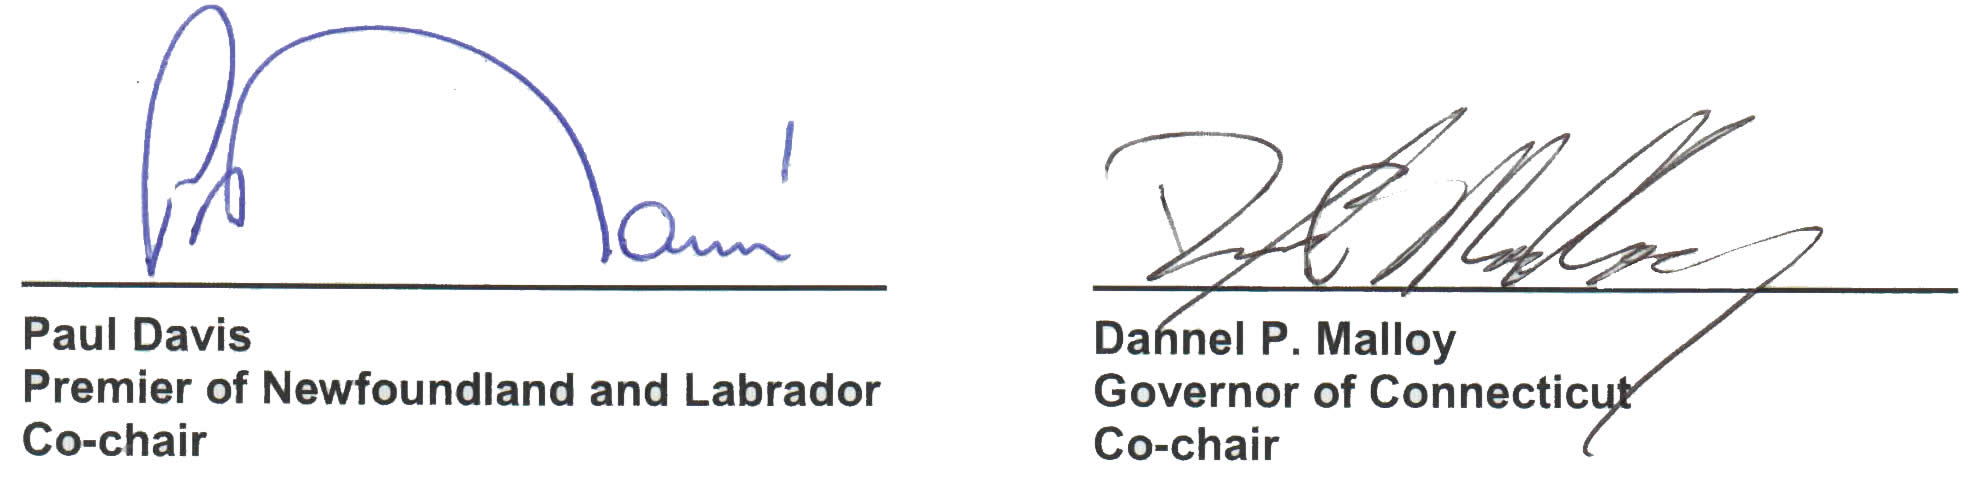 Signature of Paul Davis, Premier of Newfoundland and Labrador, Co-chair and Dannel P. Malloy, Governor of Connecticut, Co-chair